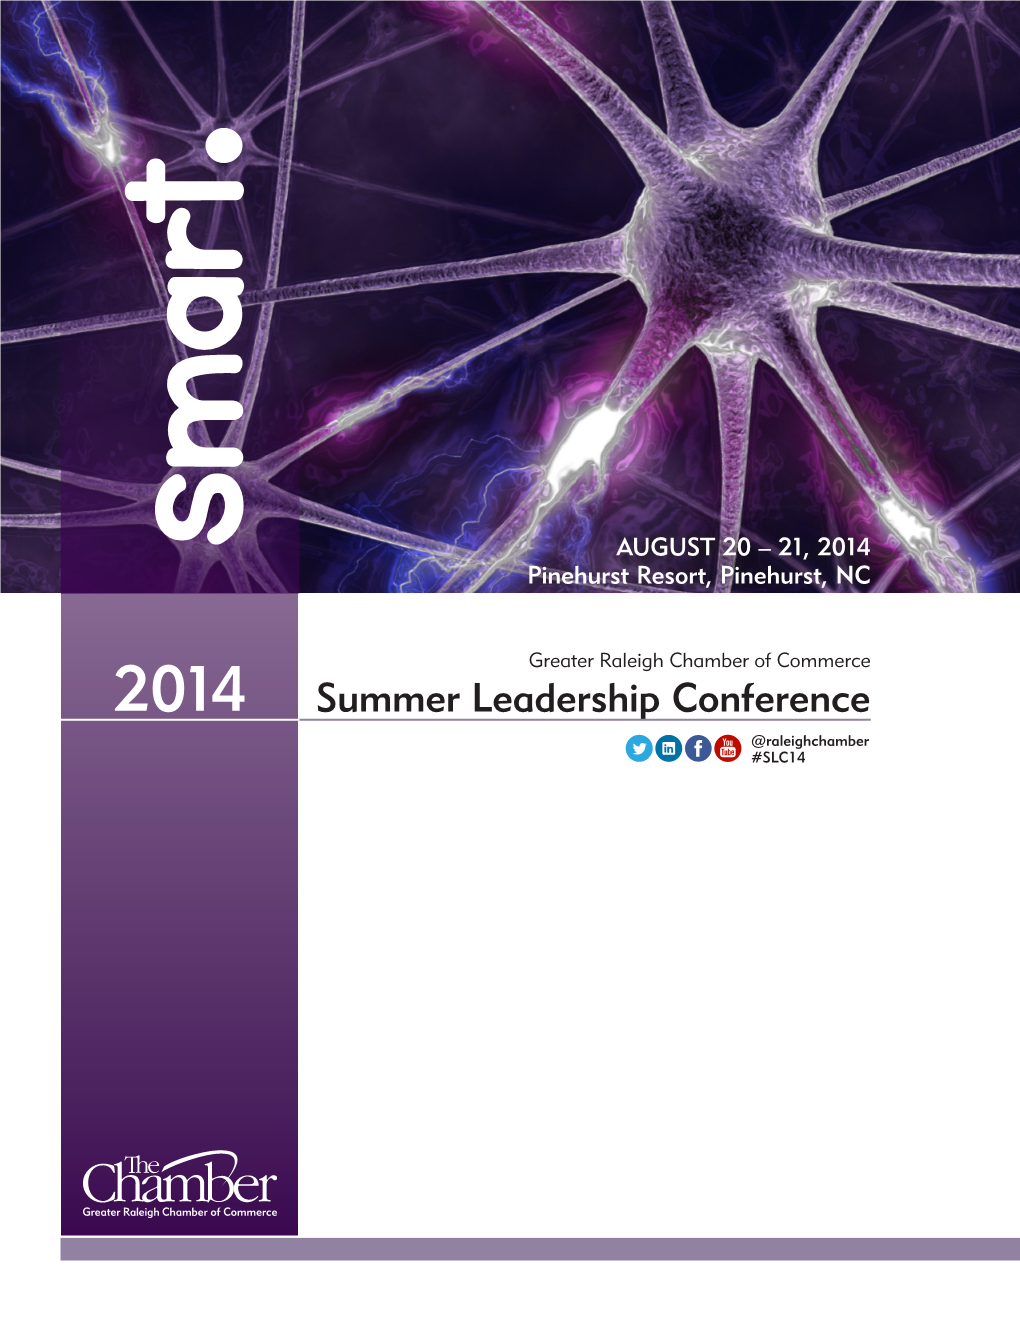 Summer Leadership Conference @Raleighchamber #SLC14